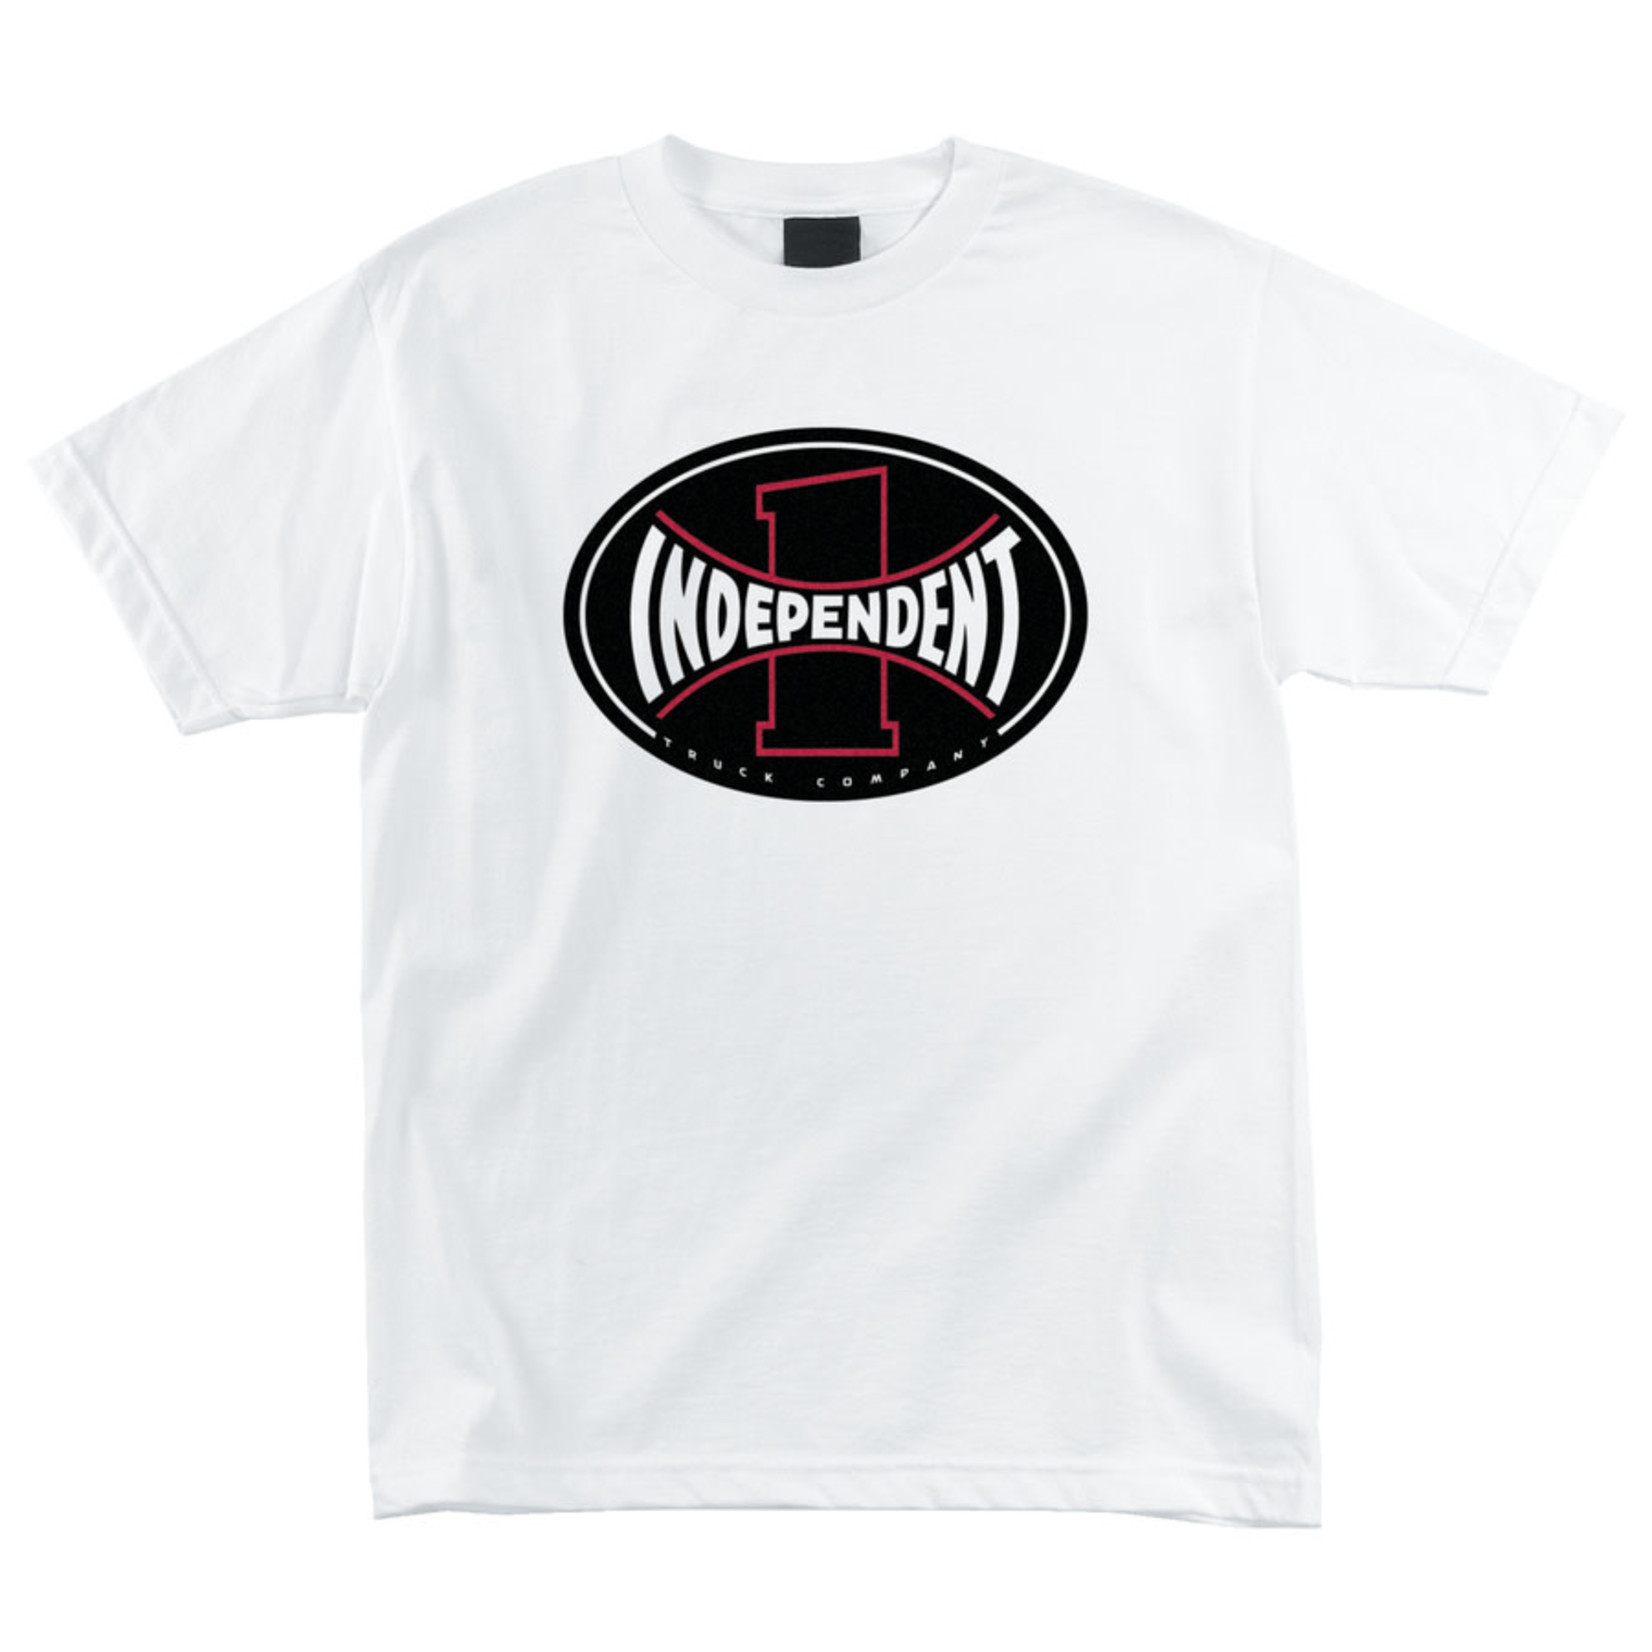 Independent Independent ITC Span S/S Men's T-Shirt - White - S -